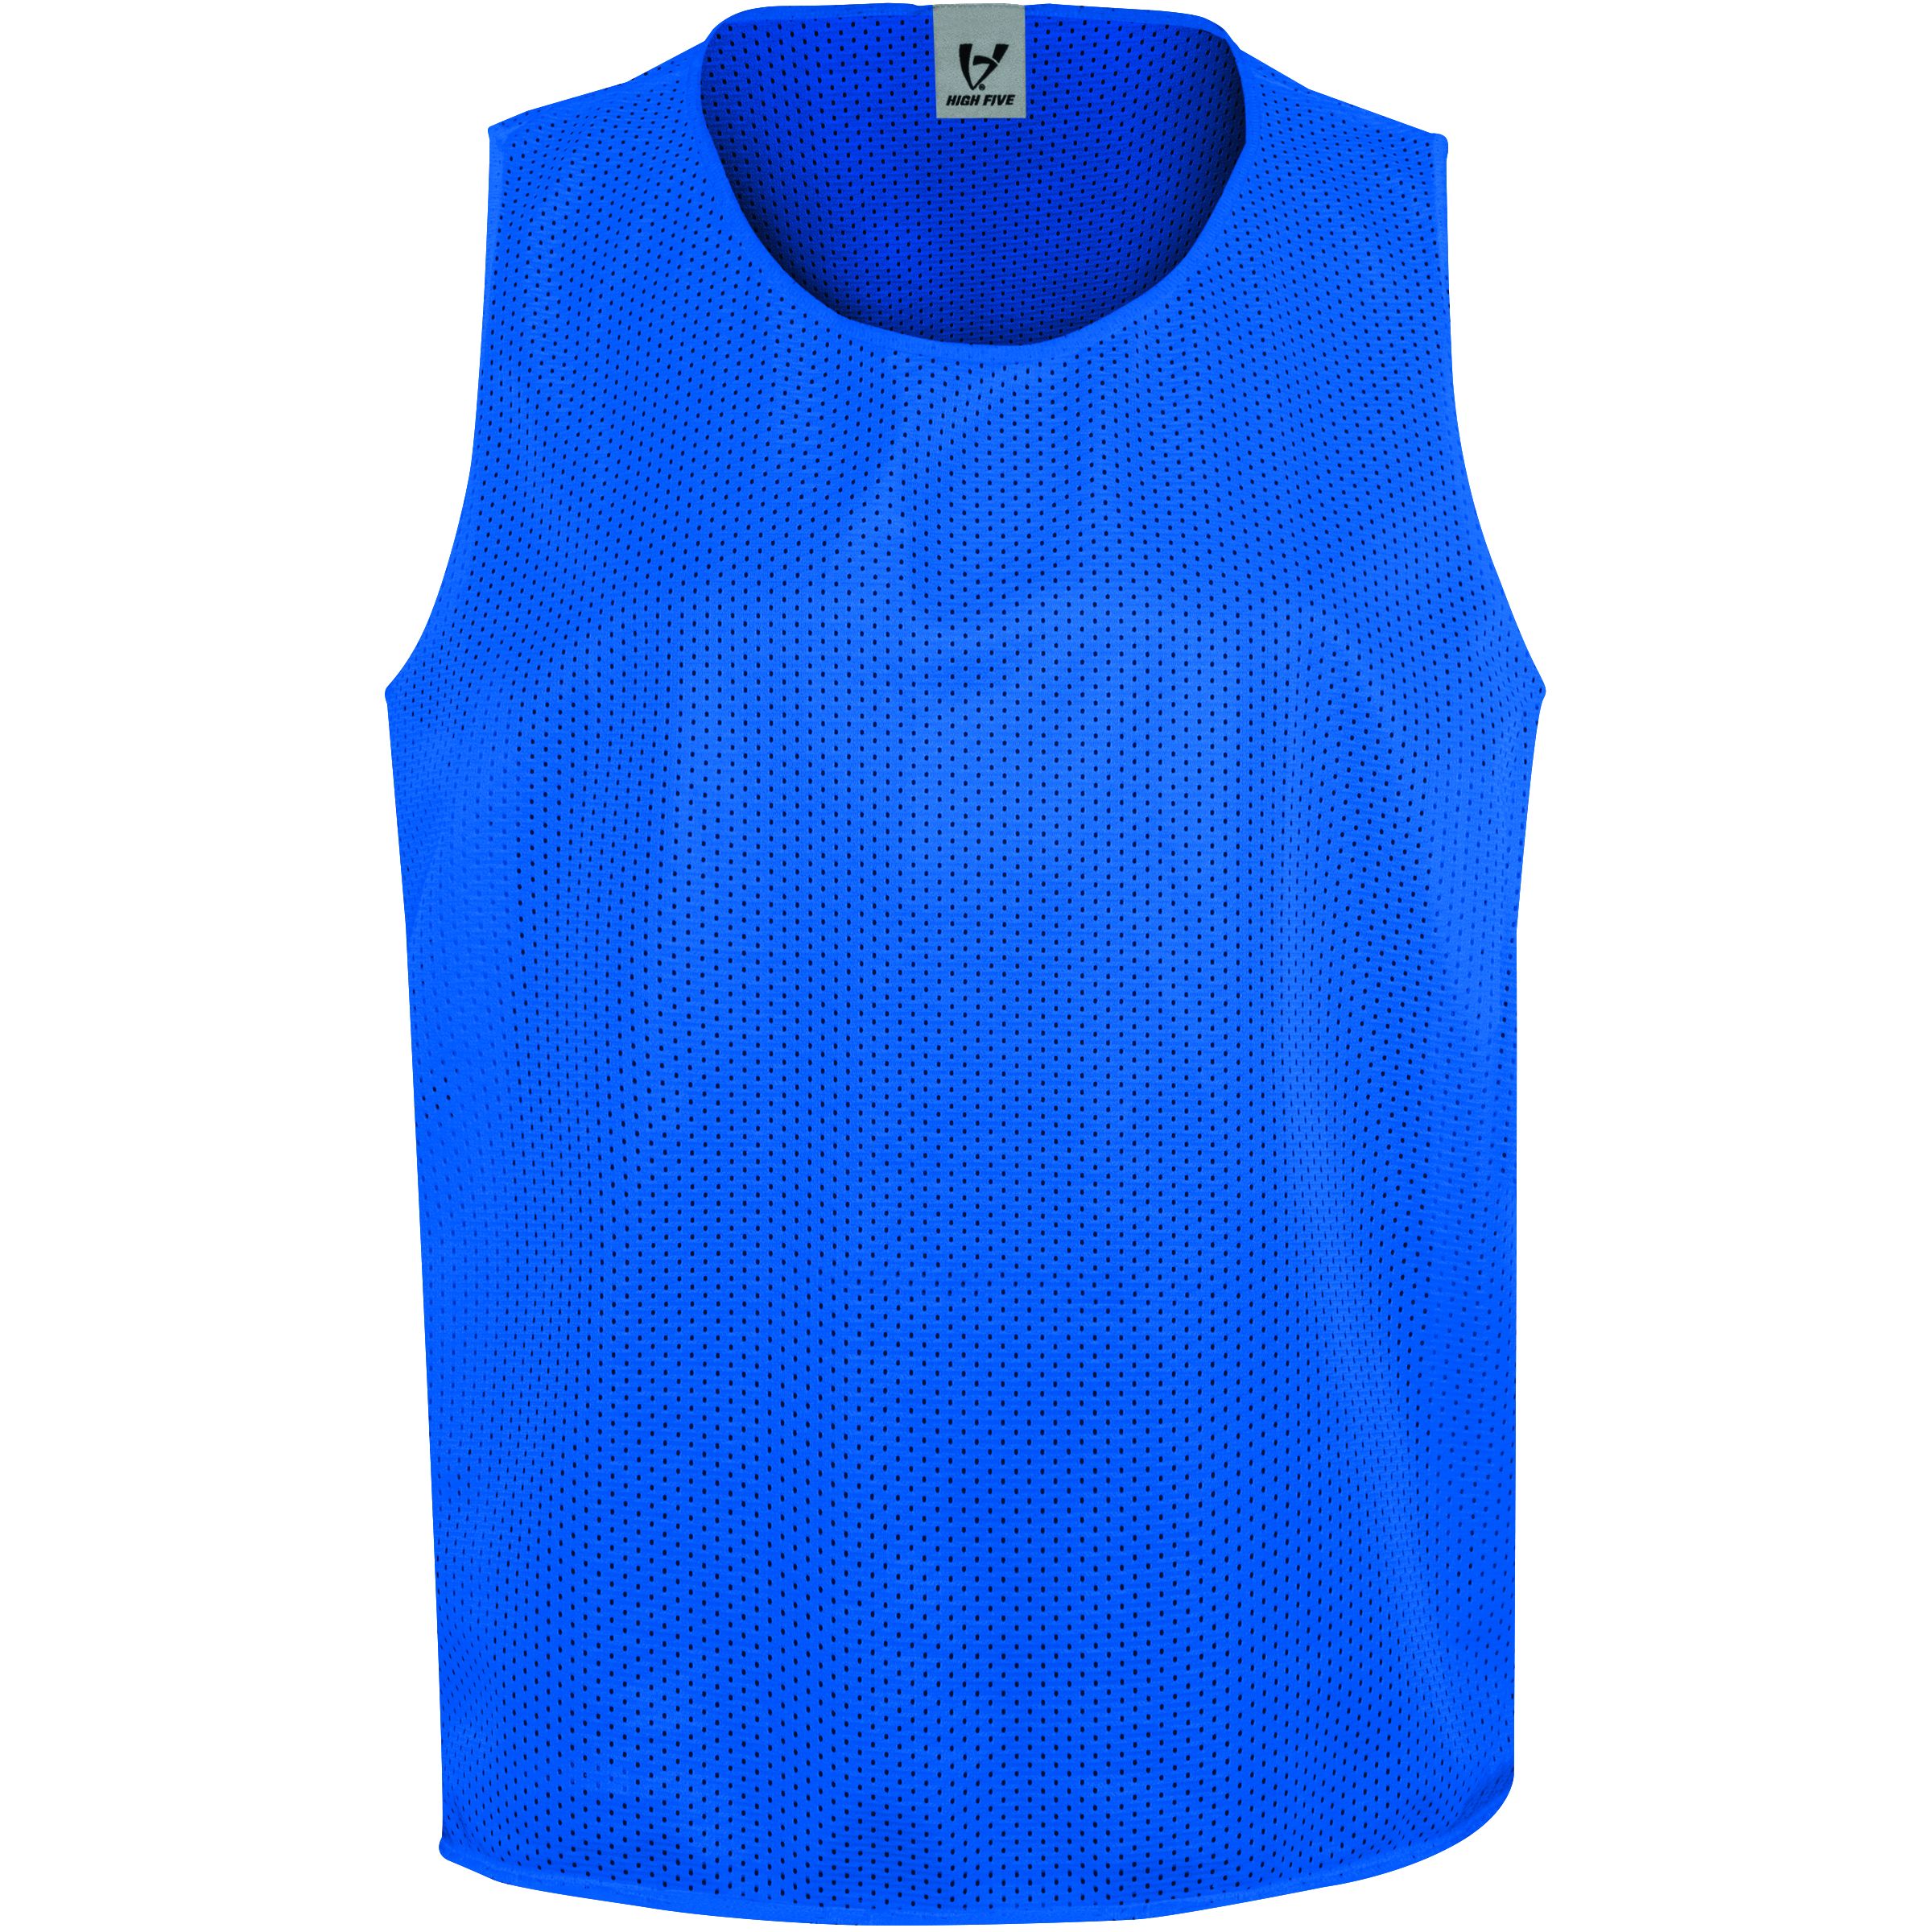 High Five 321201 - Youth Scrimmage Vest